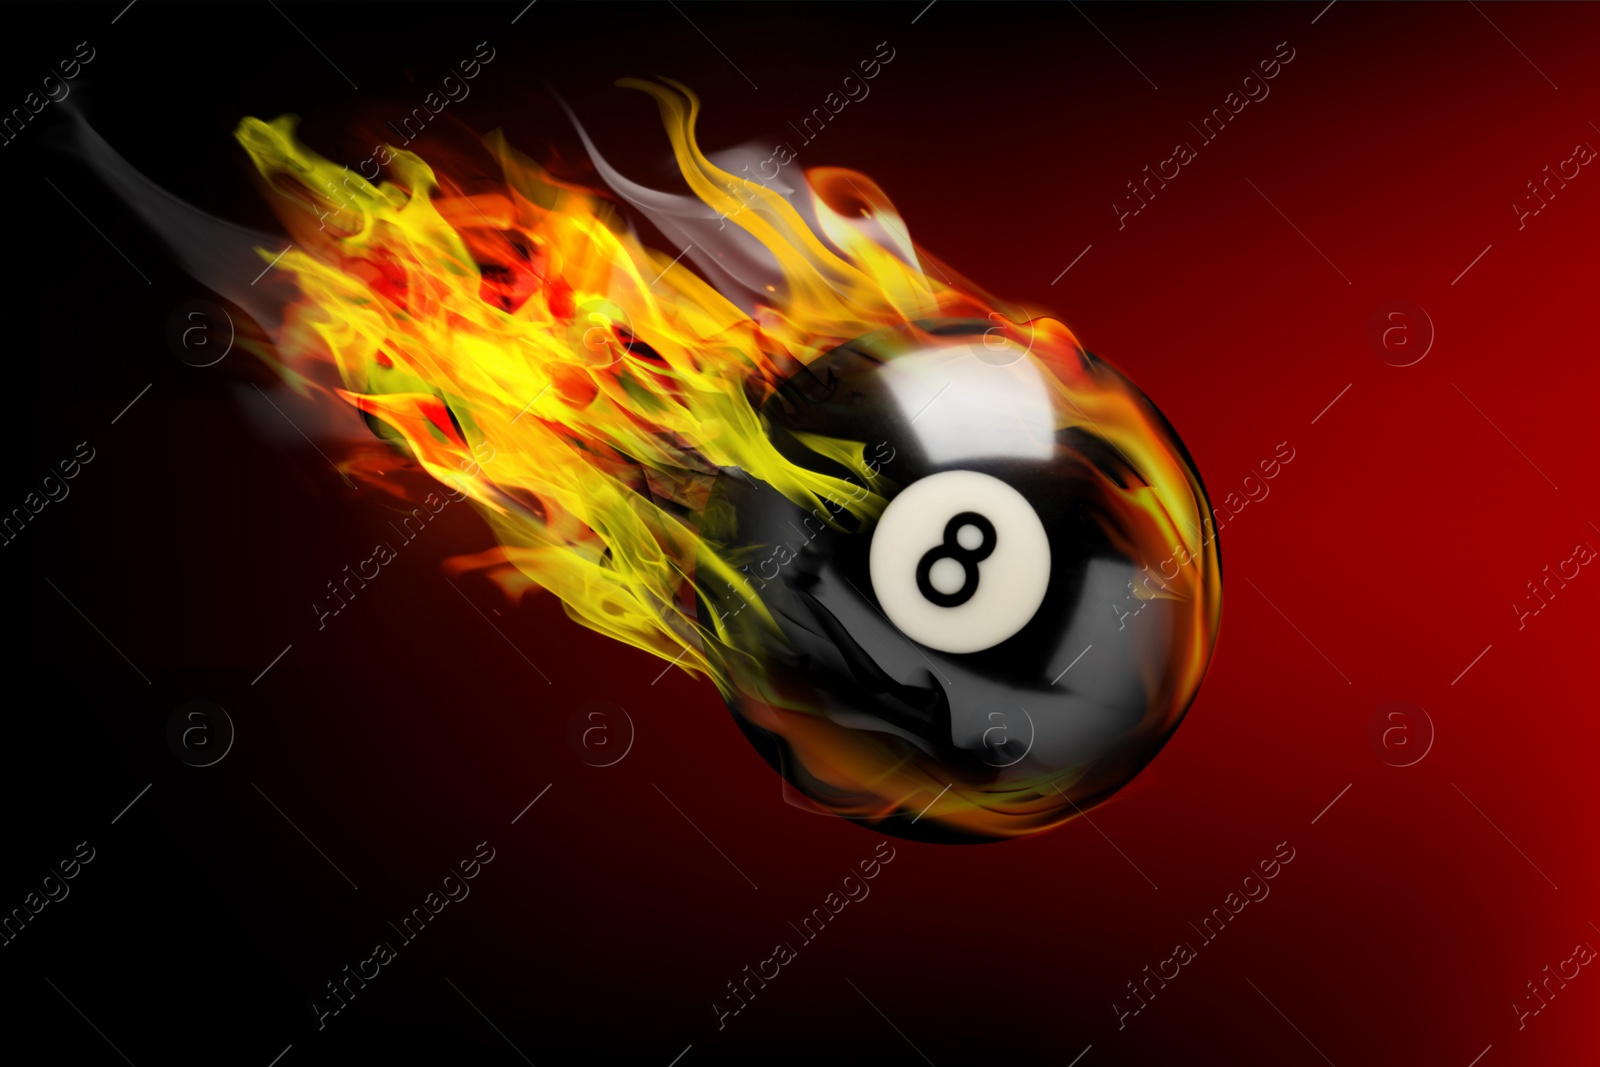 Image of Billiard ball with number 8 in fire flying on color background